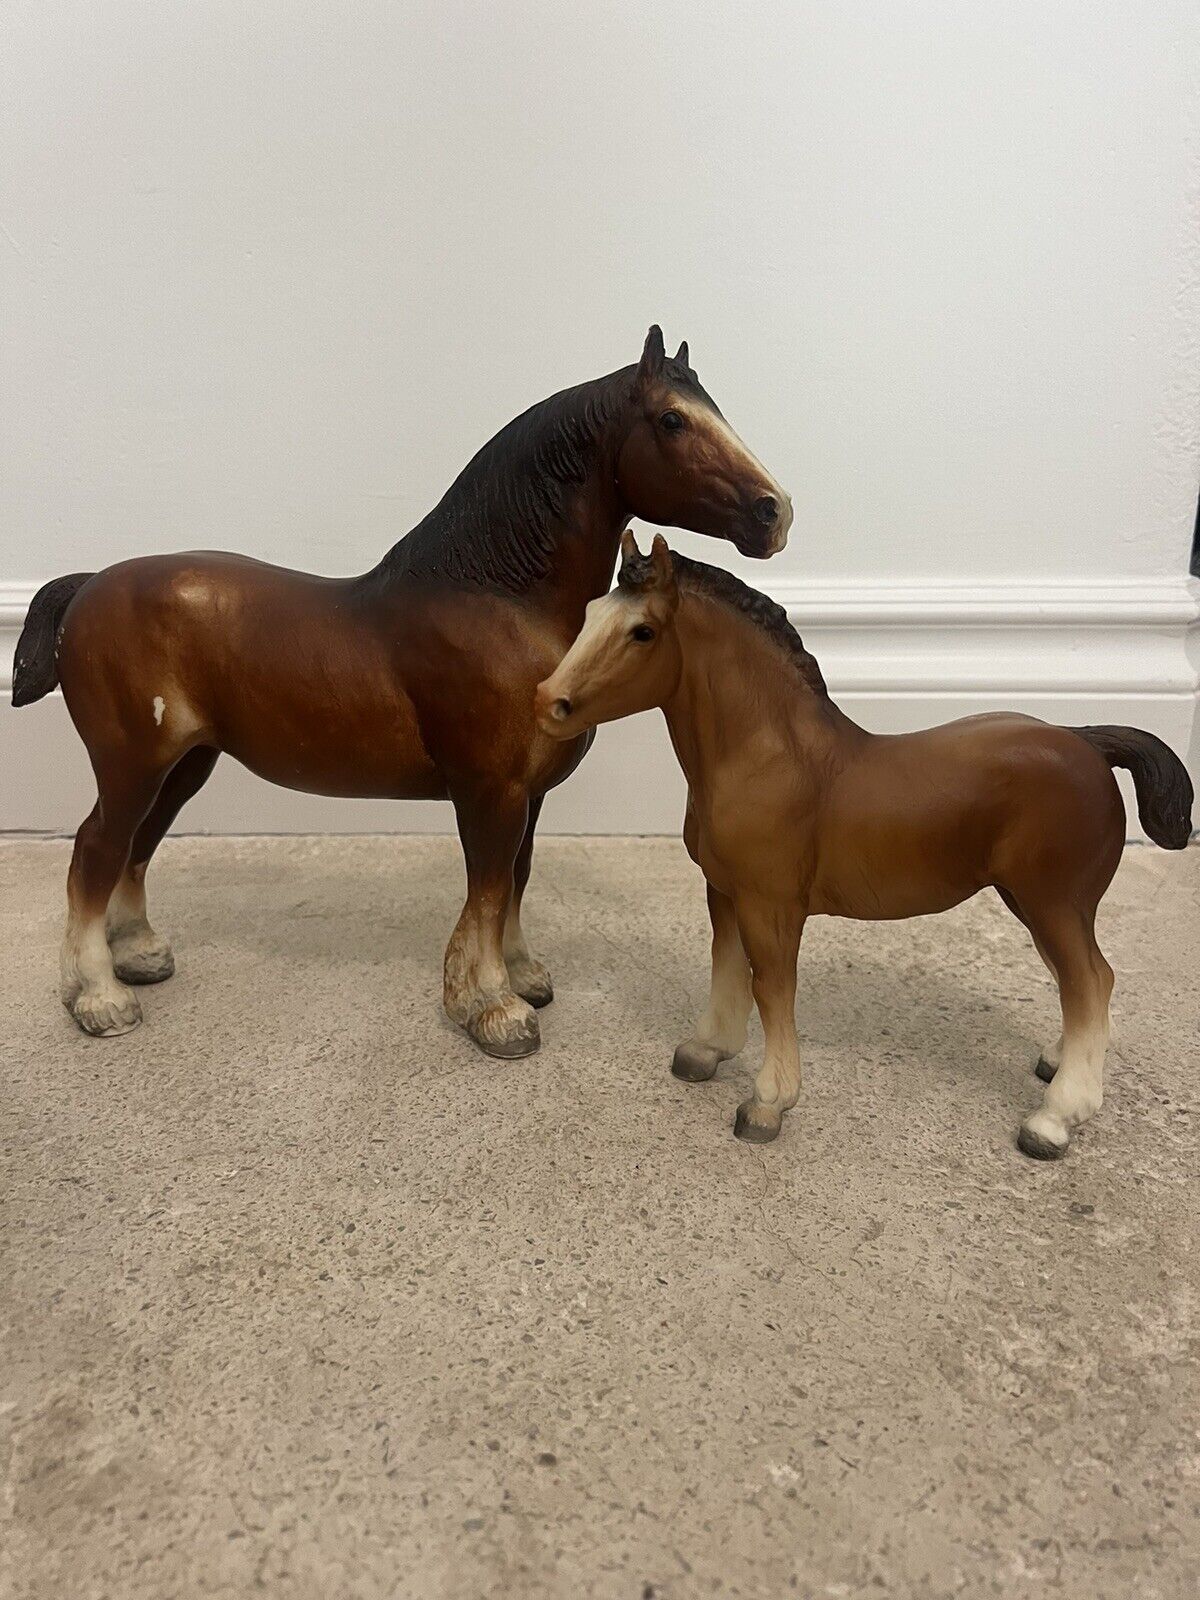 Vintage Breyer Traditional Clydesdale Mare #84 & Clydesdale Foal #83